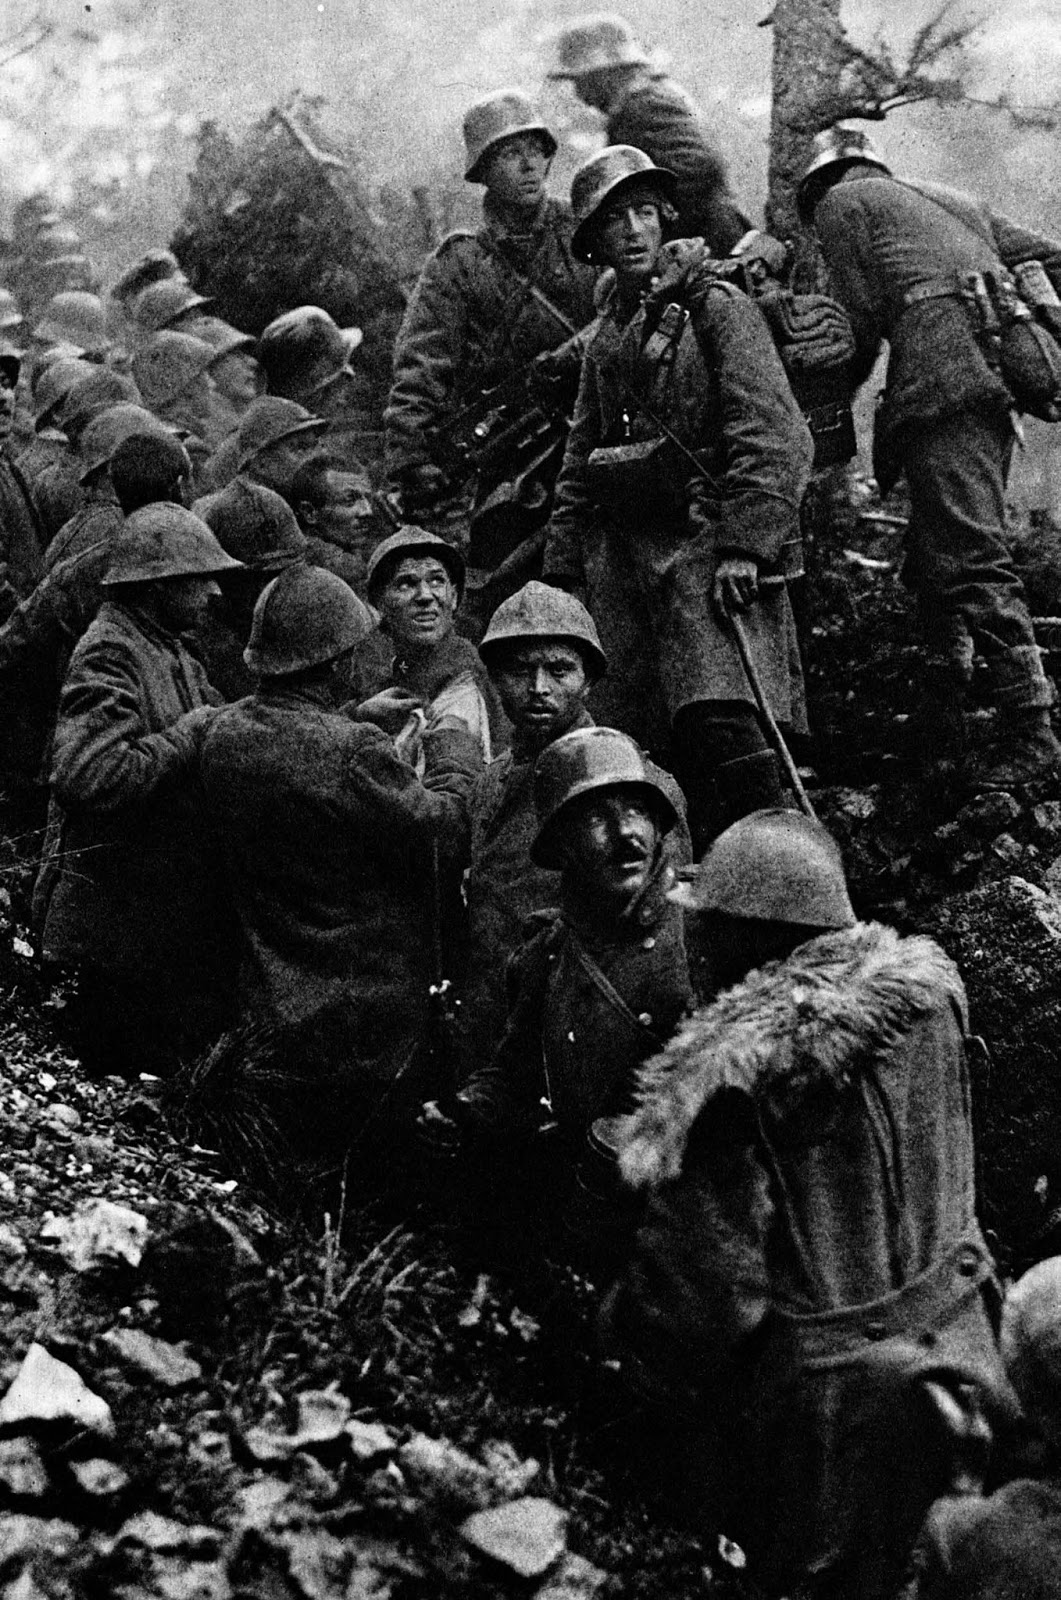 Captured Italian soldiers are escorted to the rear by German soldiers during the Battle of Caporetto, 1917